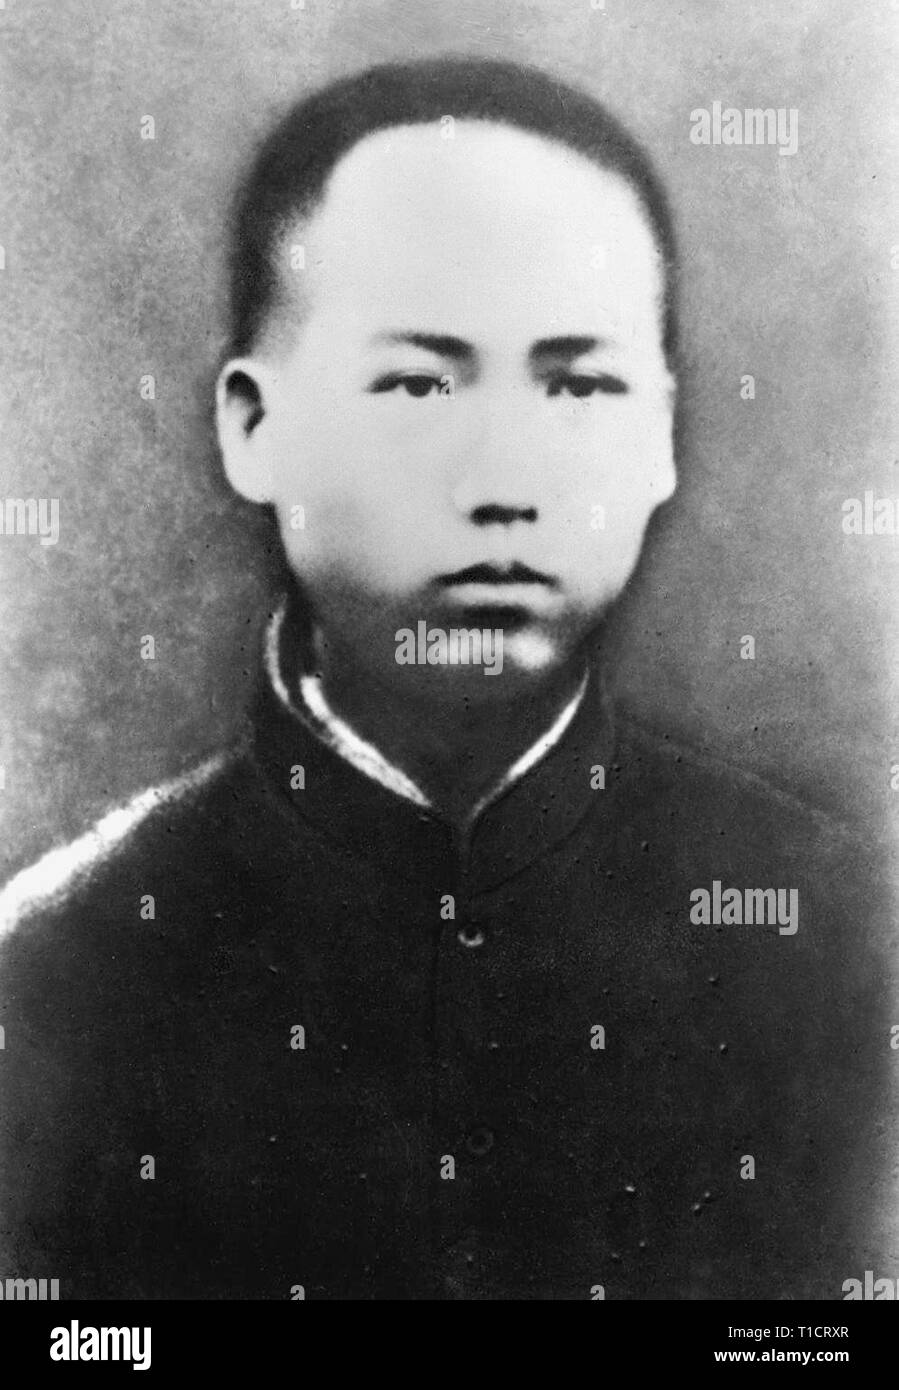 Mao Zedong in 1913. Mao Zedong (1893 – 1976), Chairman Mao, Chinese communist revolutionary who became the founding father of the People's Republic of China, which he ruled as the Chairman of the Communist Party of China from its establishment in 1949 until his death in 1976. Stock Photo